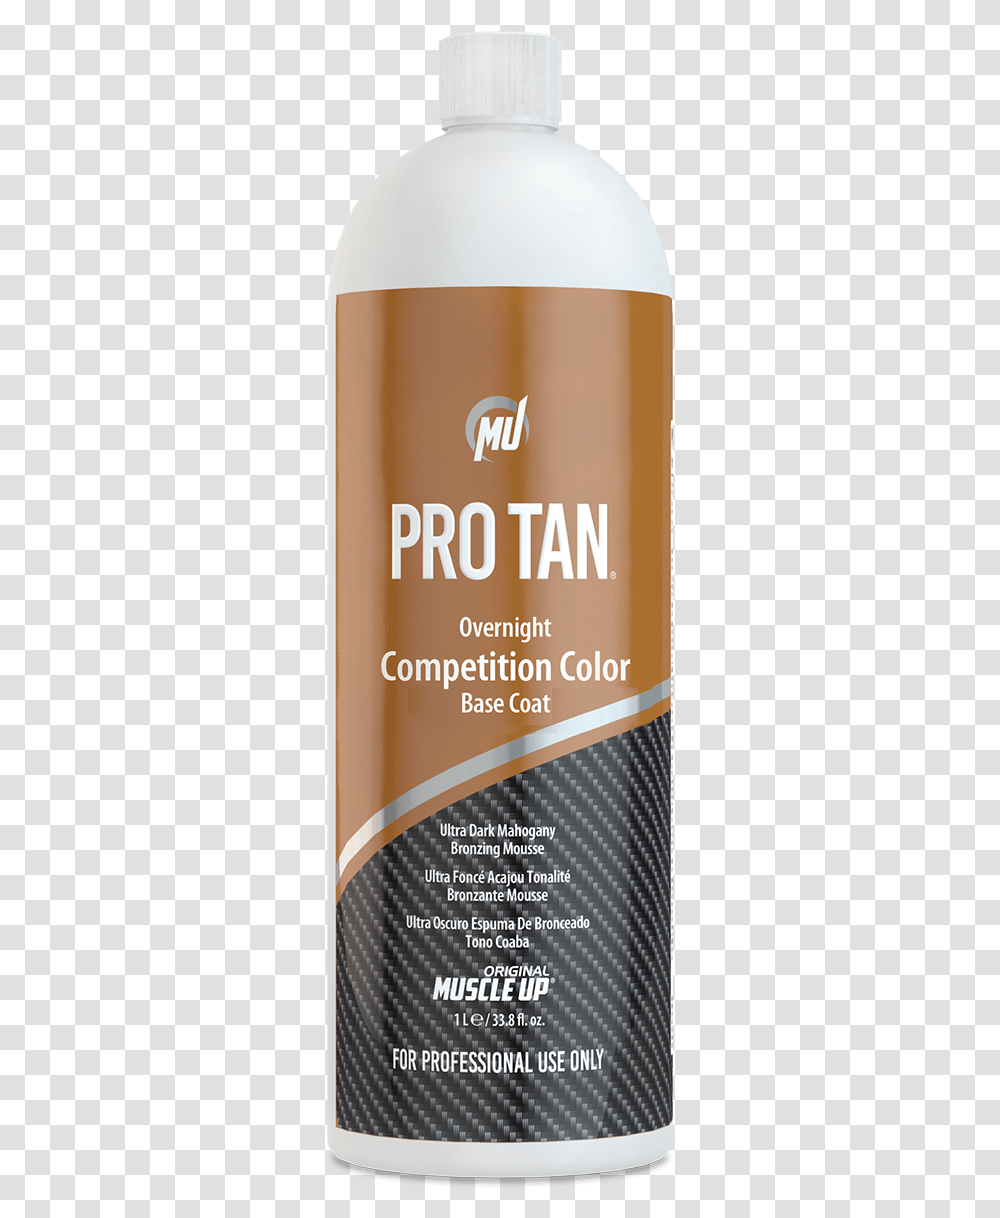 Pro Tan Overnight Competition Color, Bottle, Aluminium, Tin, Can Transparent Png